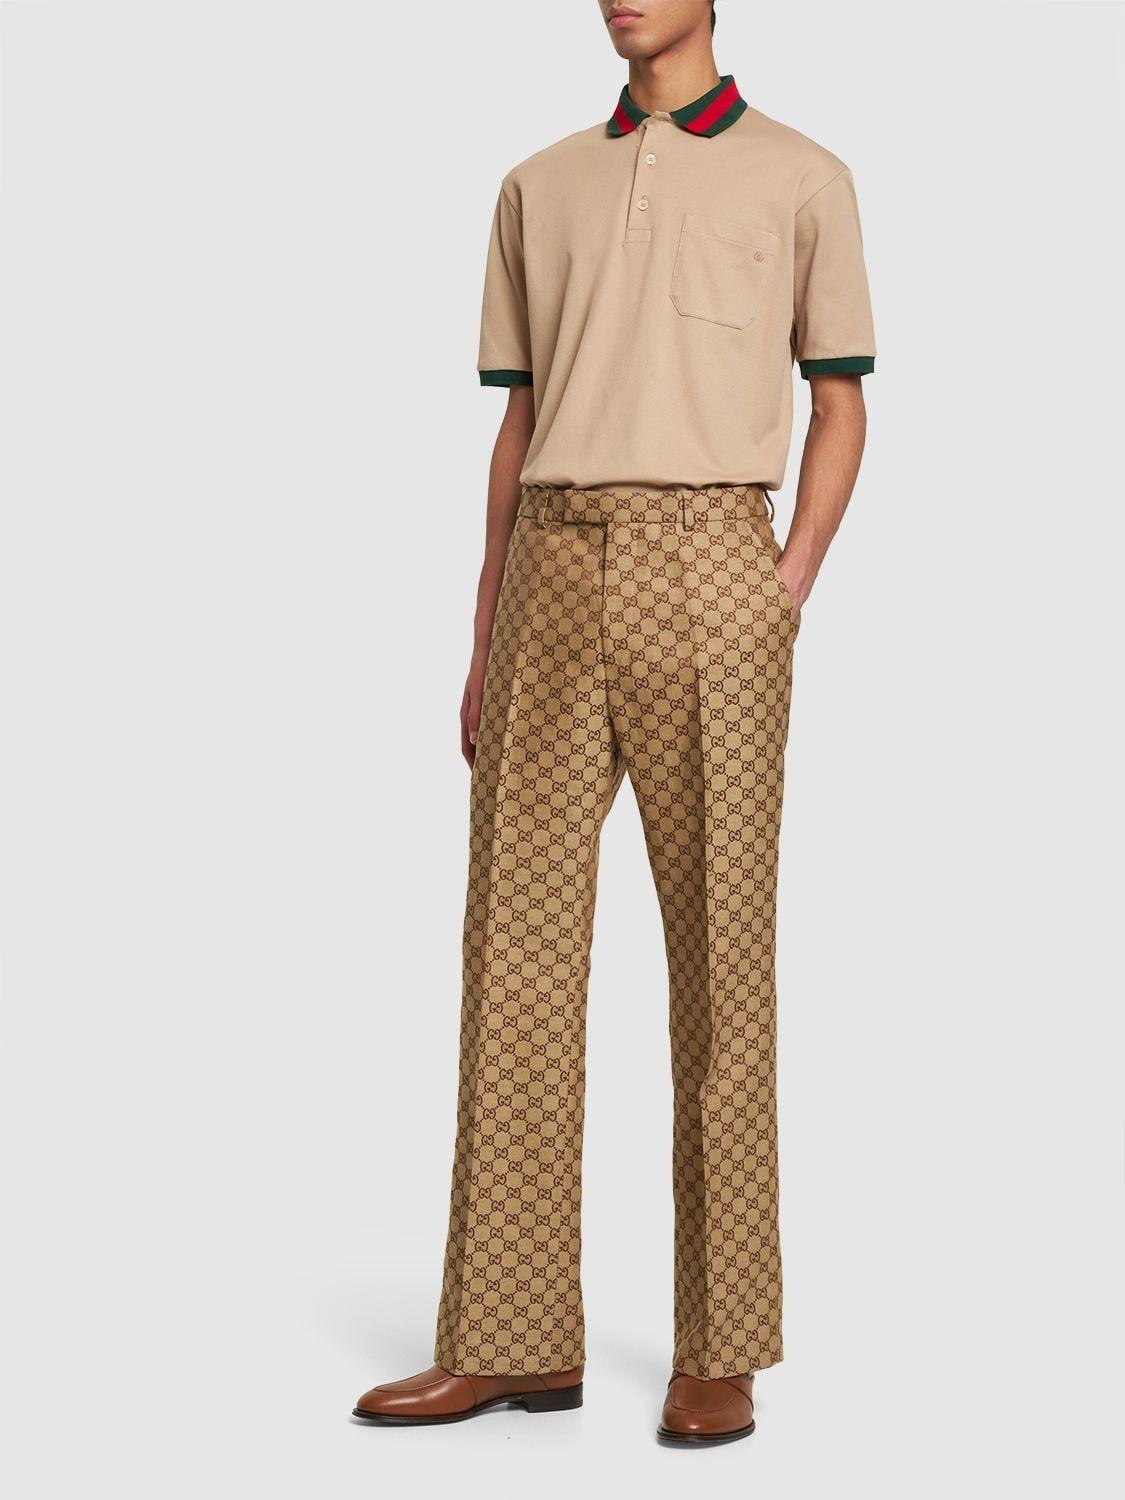 GG jersey cotton jogging pant in black and camel